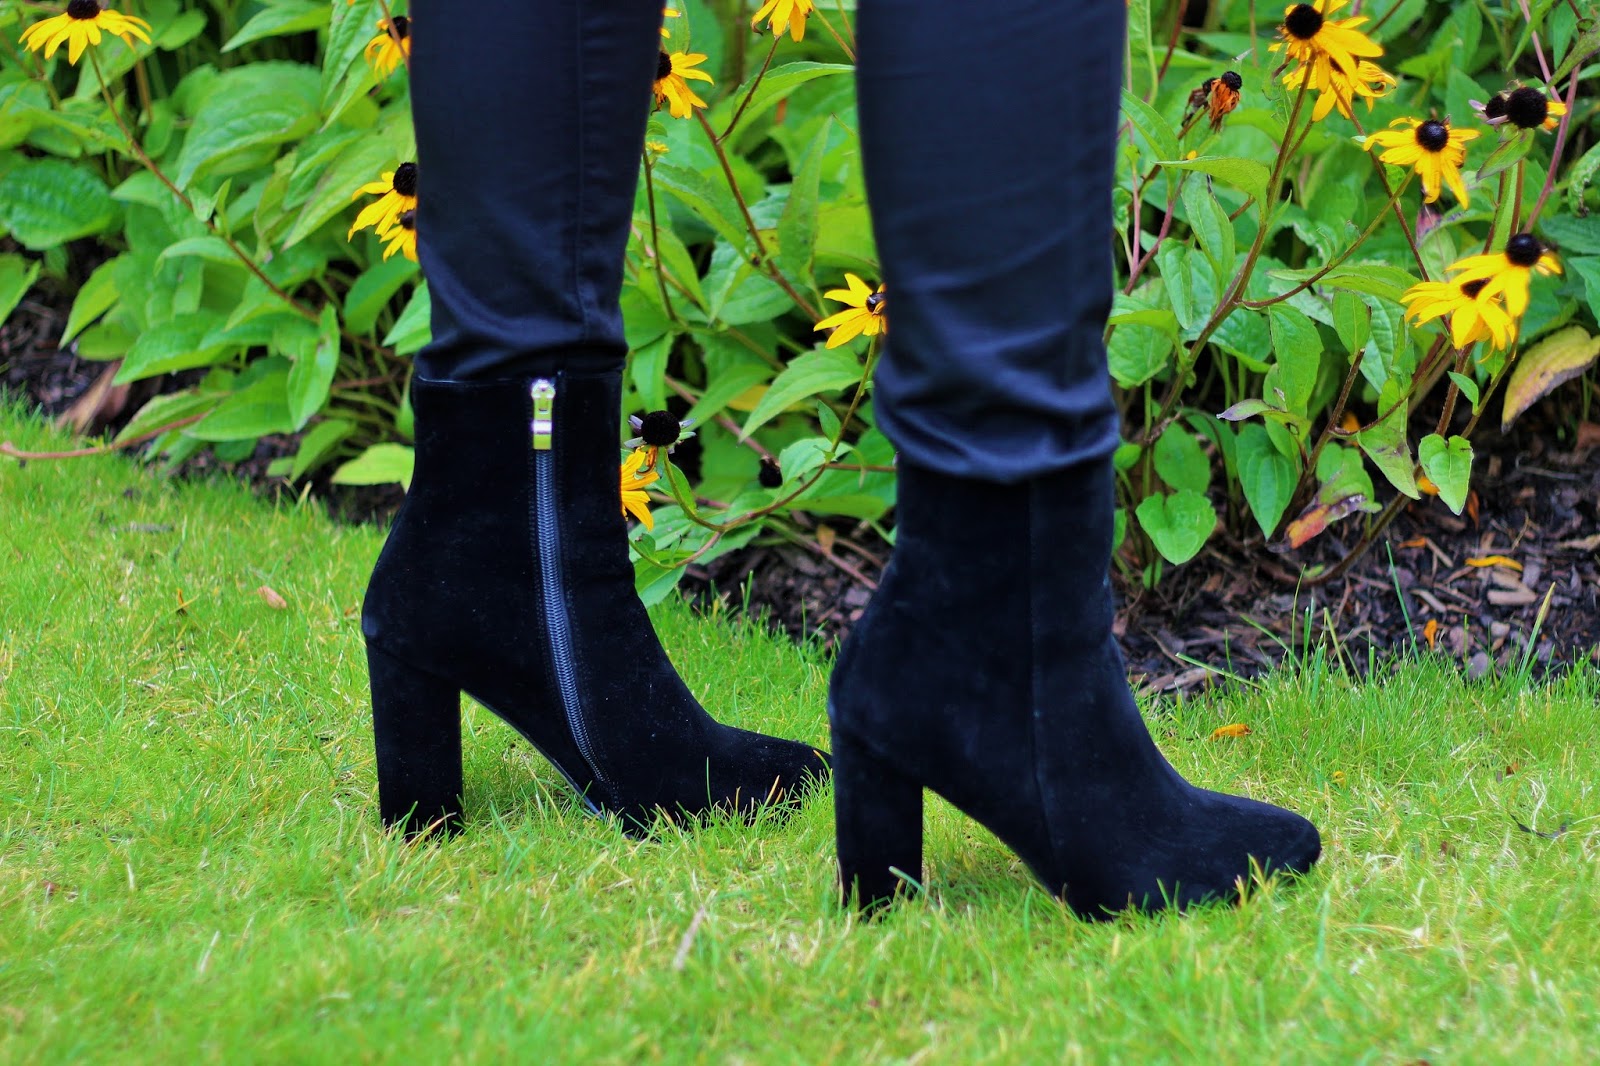 suede heeled boots